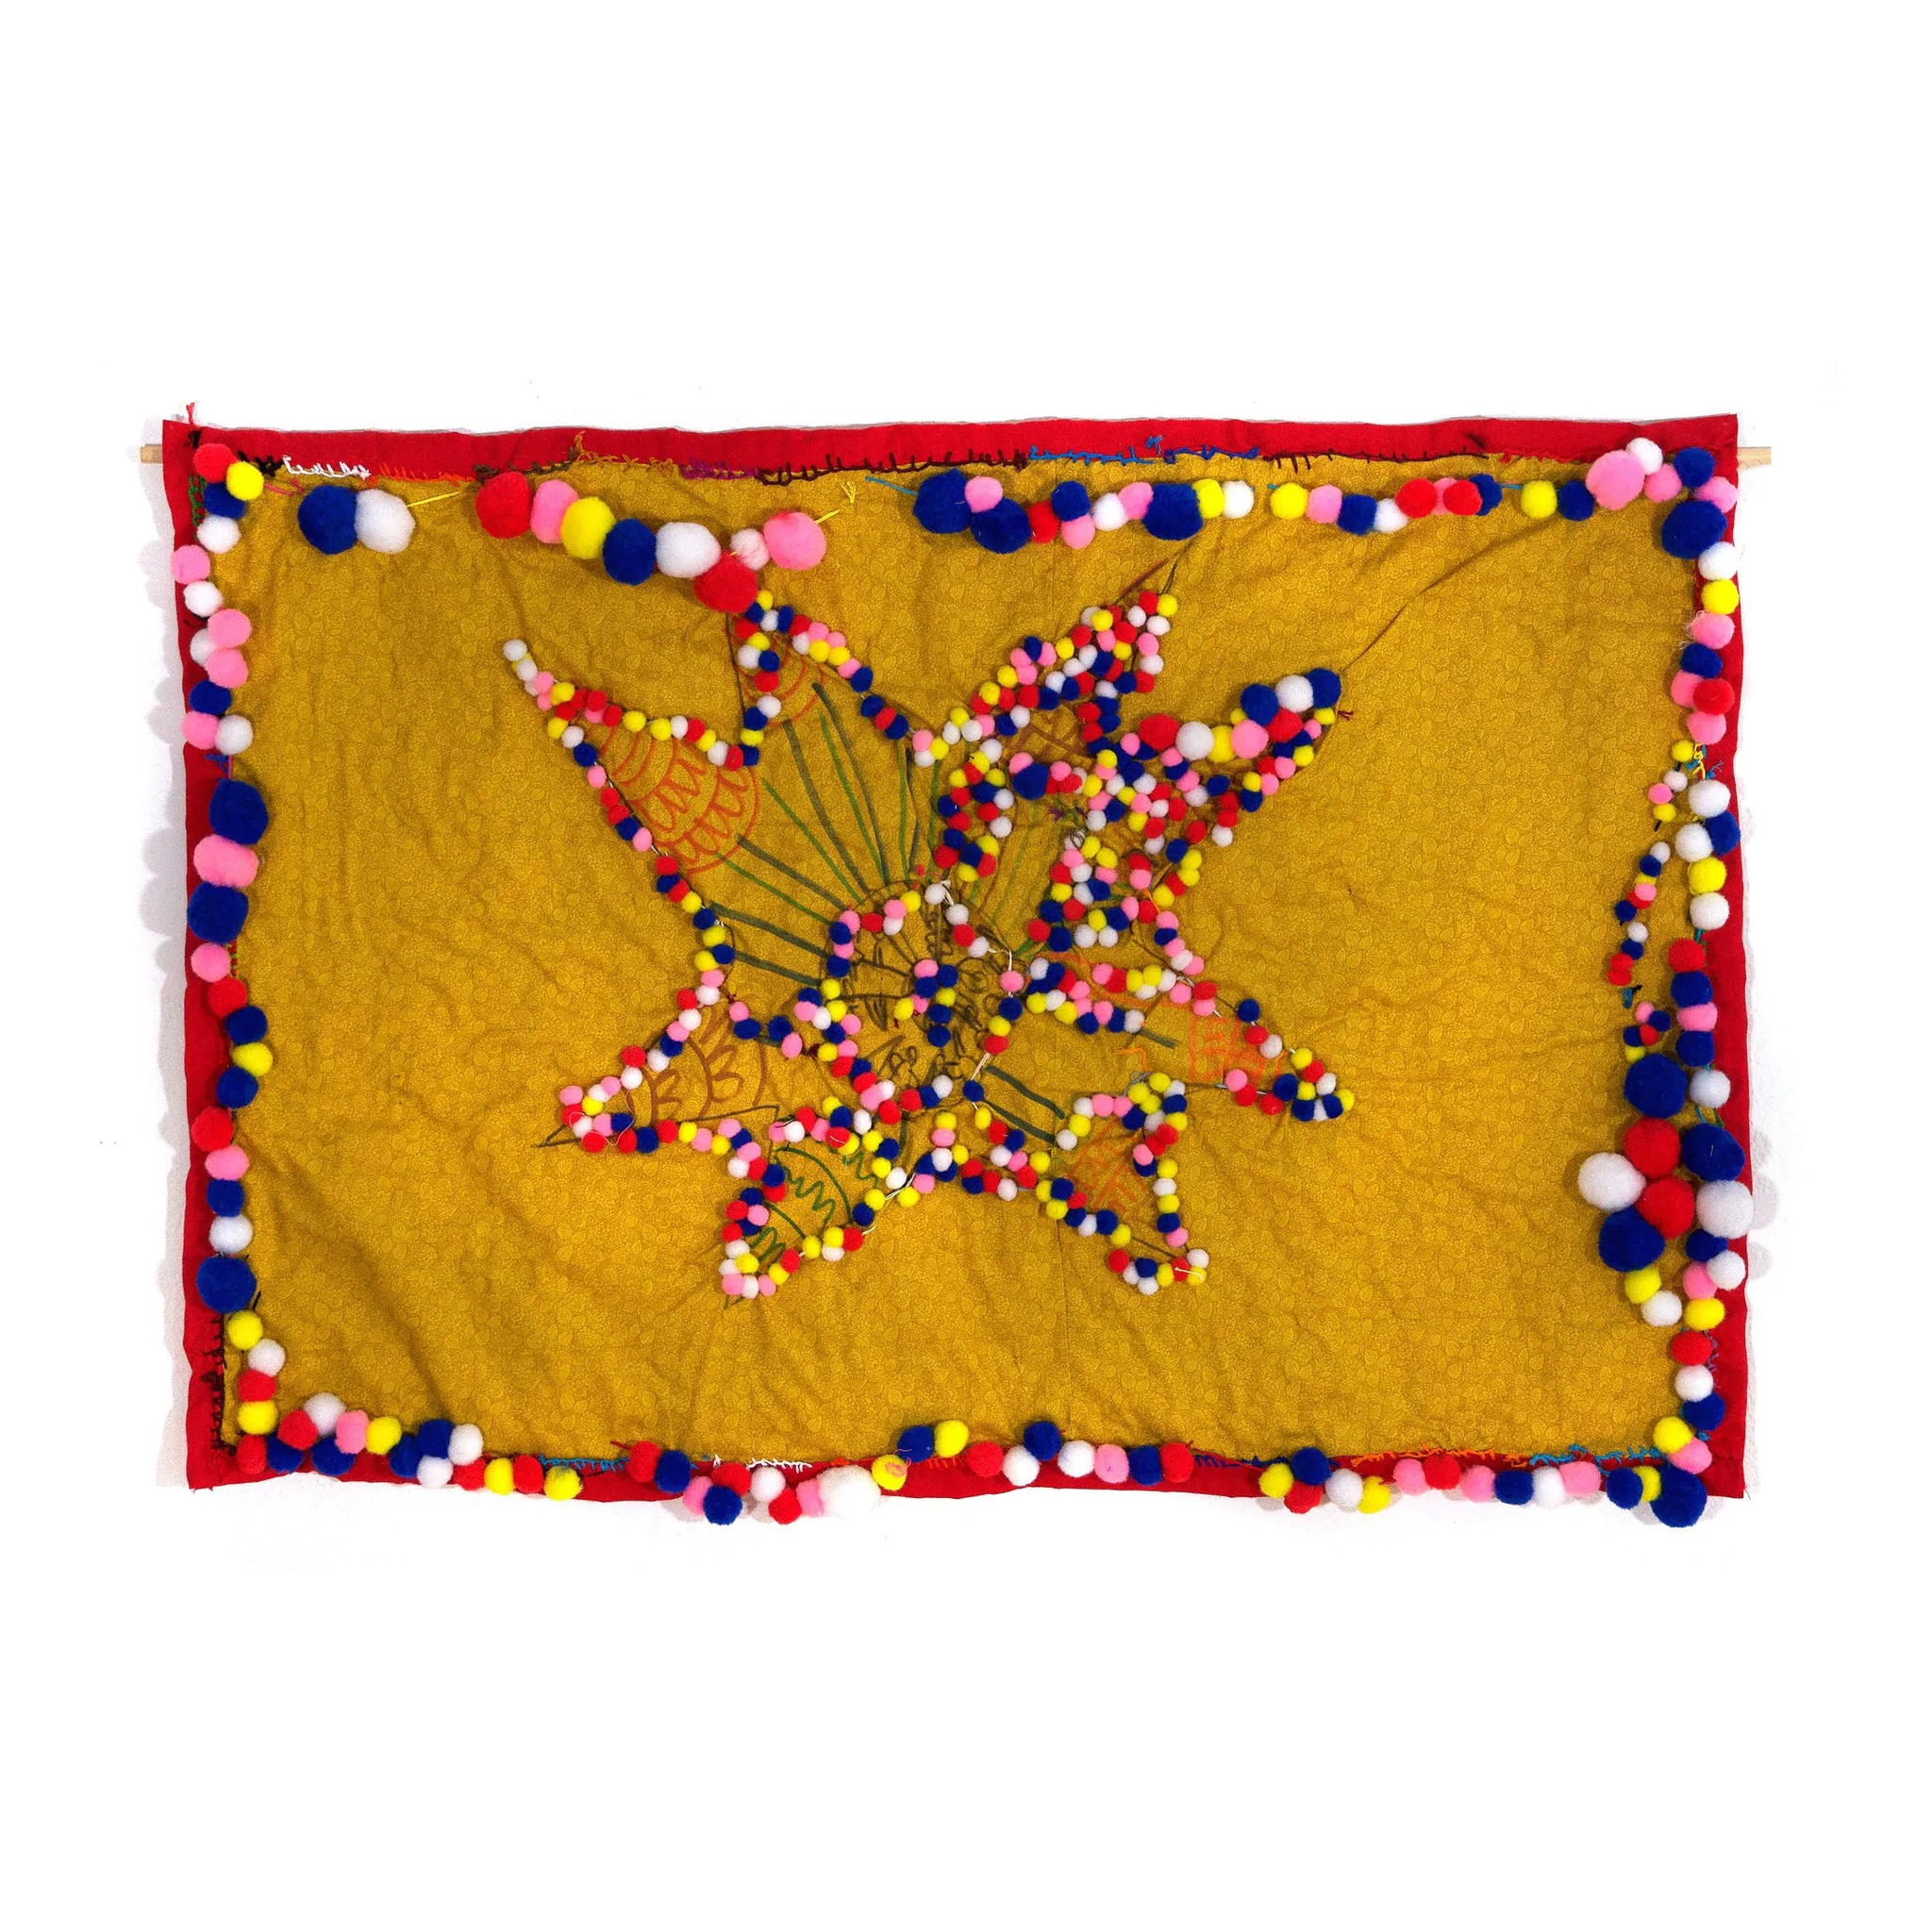 Yellow fabric wall hanging with a design made of red, blue and white pompoms lining the outside and creating a shape inside.